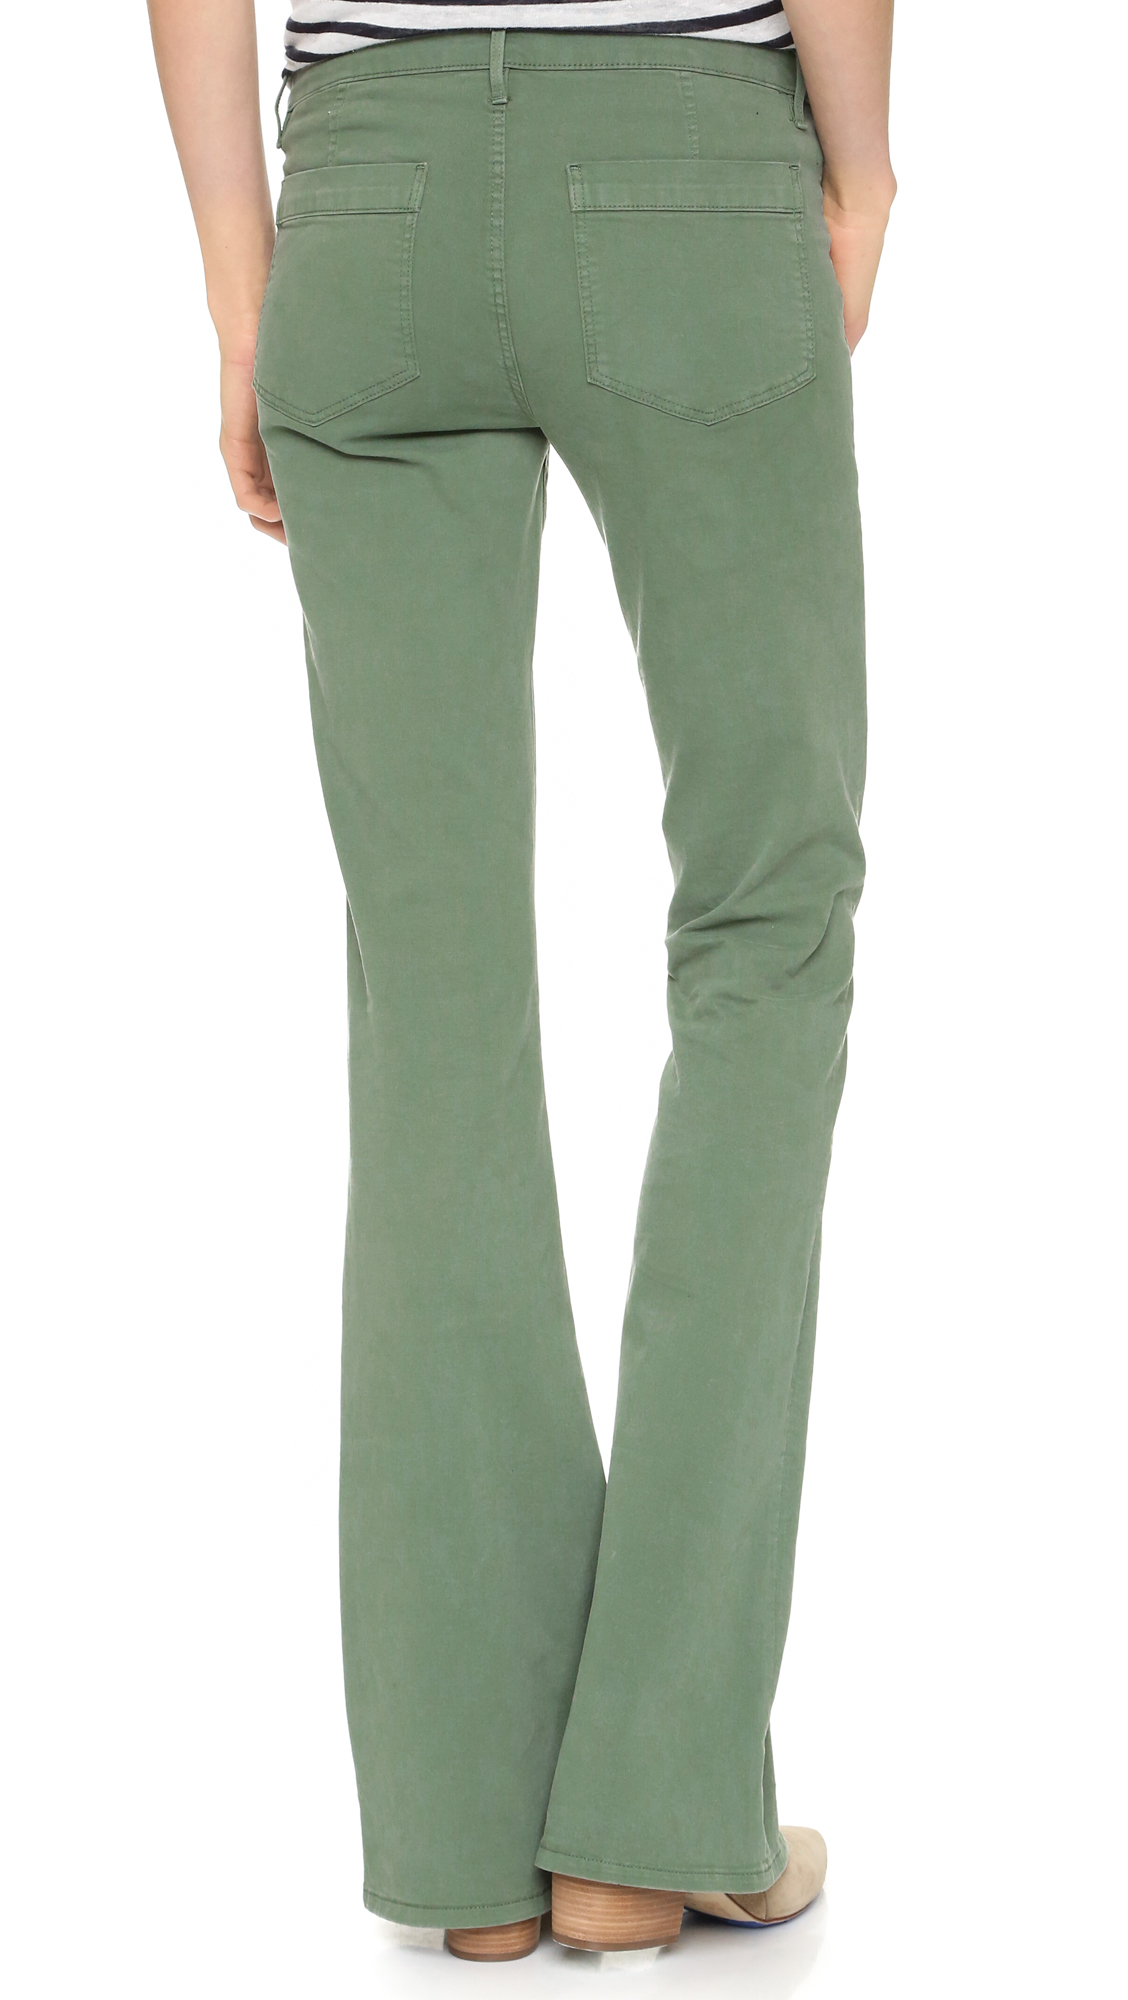 Lyst - 3X1 W2 Military Flare Pants in Green